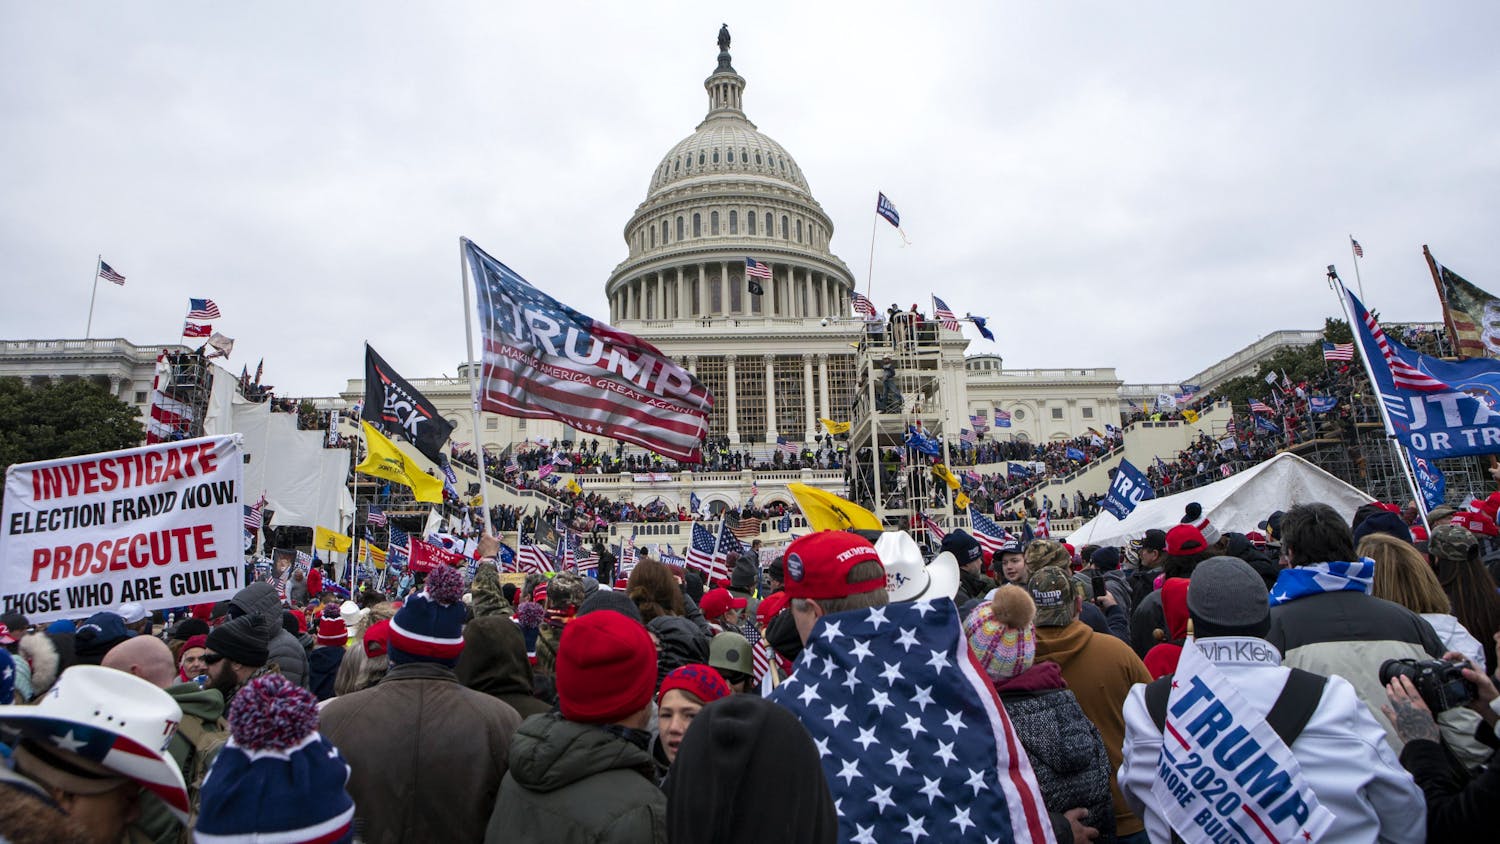 Rioters loyal to President Donald Trump rally at the U.S. Capitol in Washington on Jan. 6, 2021. Law enforcement officials say, Taylor Taranto, a man wanted for crimes related to the Jan. 6, 2021, insurrection at the U.S. Capitol has been arrested in the Washington neighborhood where former President Barack Obama lives. Taranto was seen a few blocks from the former president's home, and he fled even though he was chased by U.S. Secret Service agents. (AP Photo/Jose Luis Magana, File)